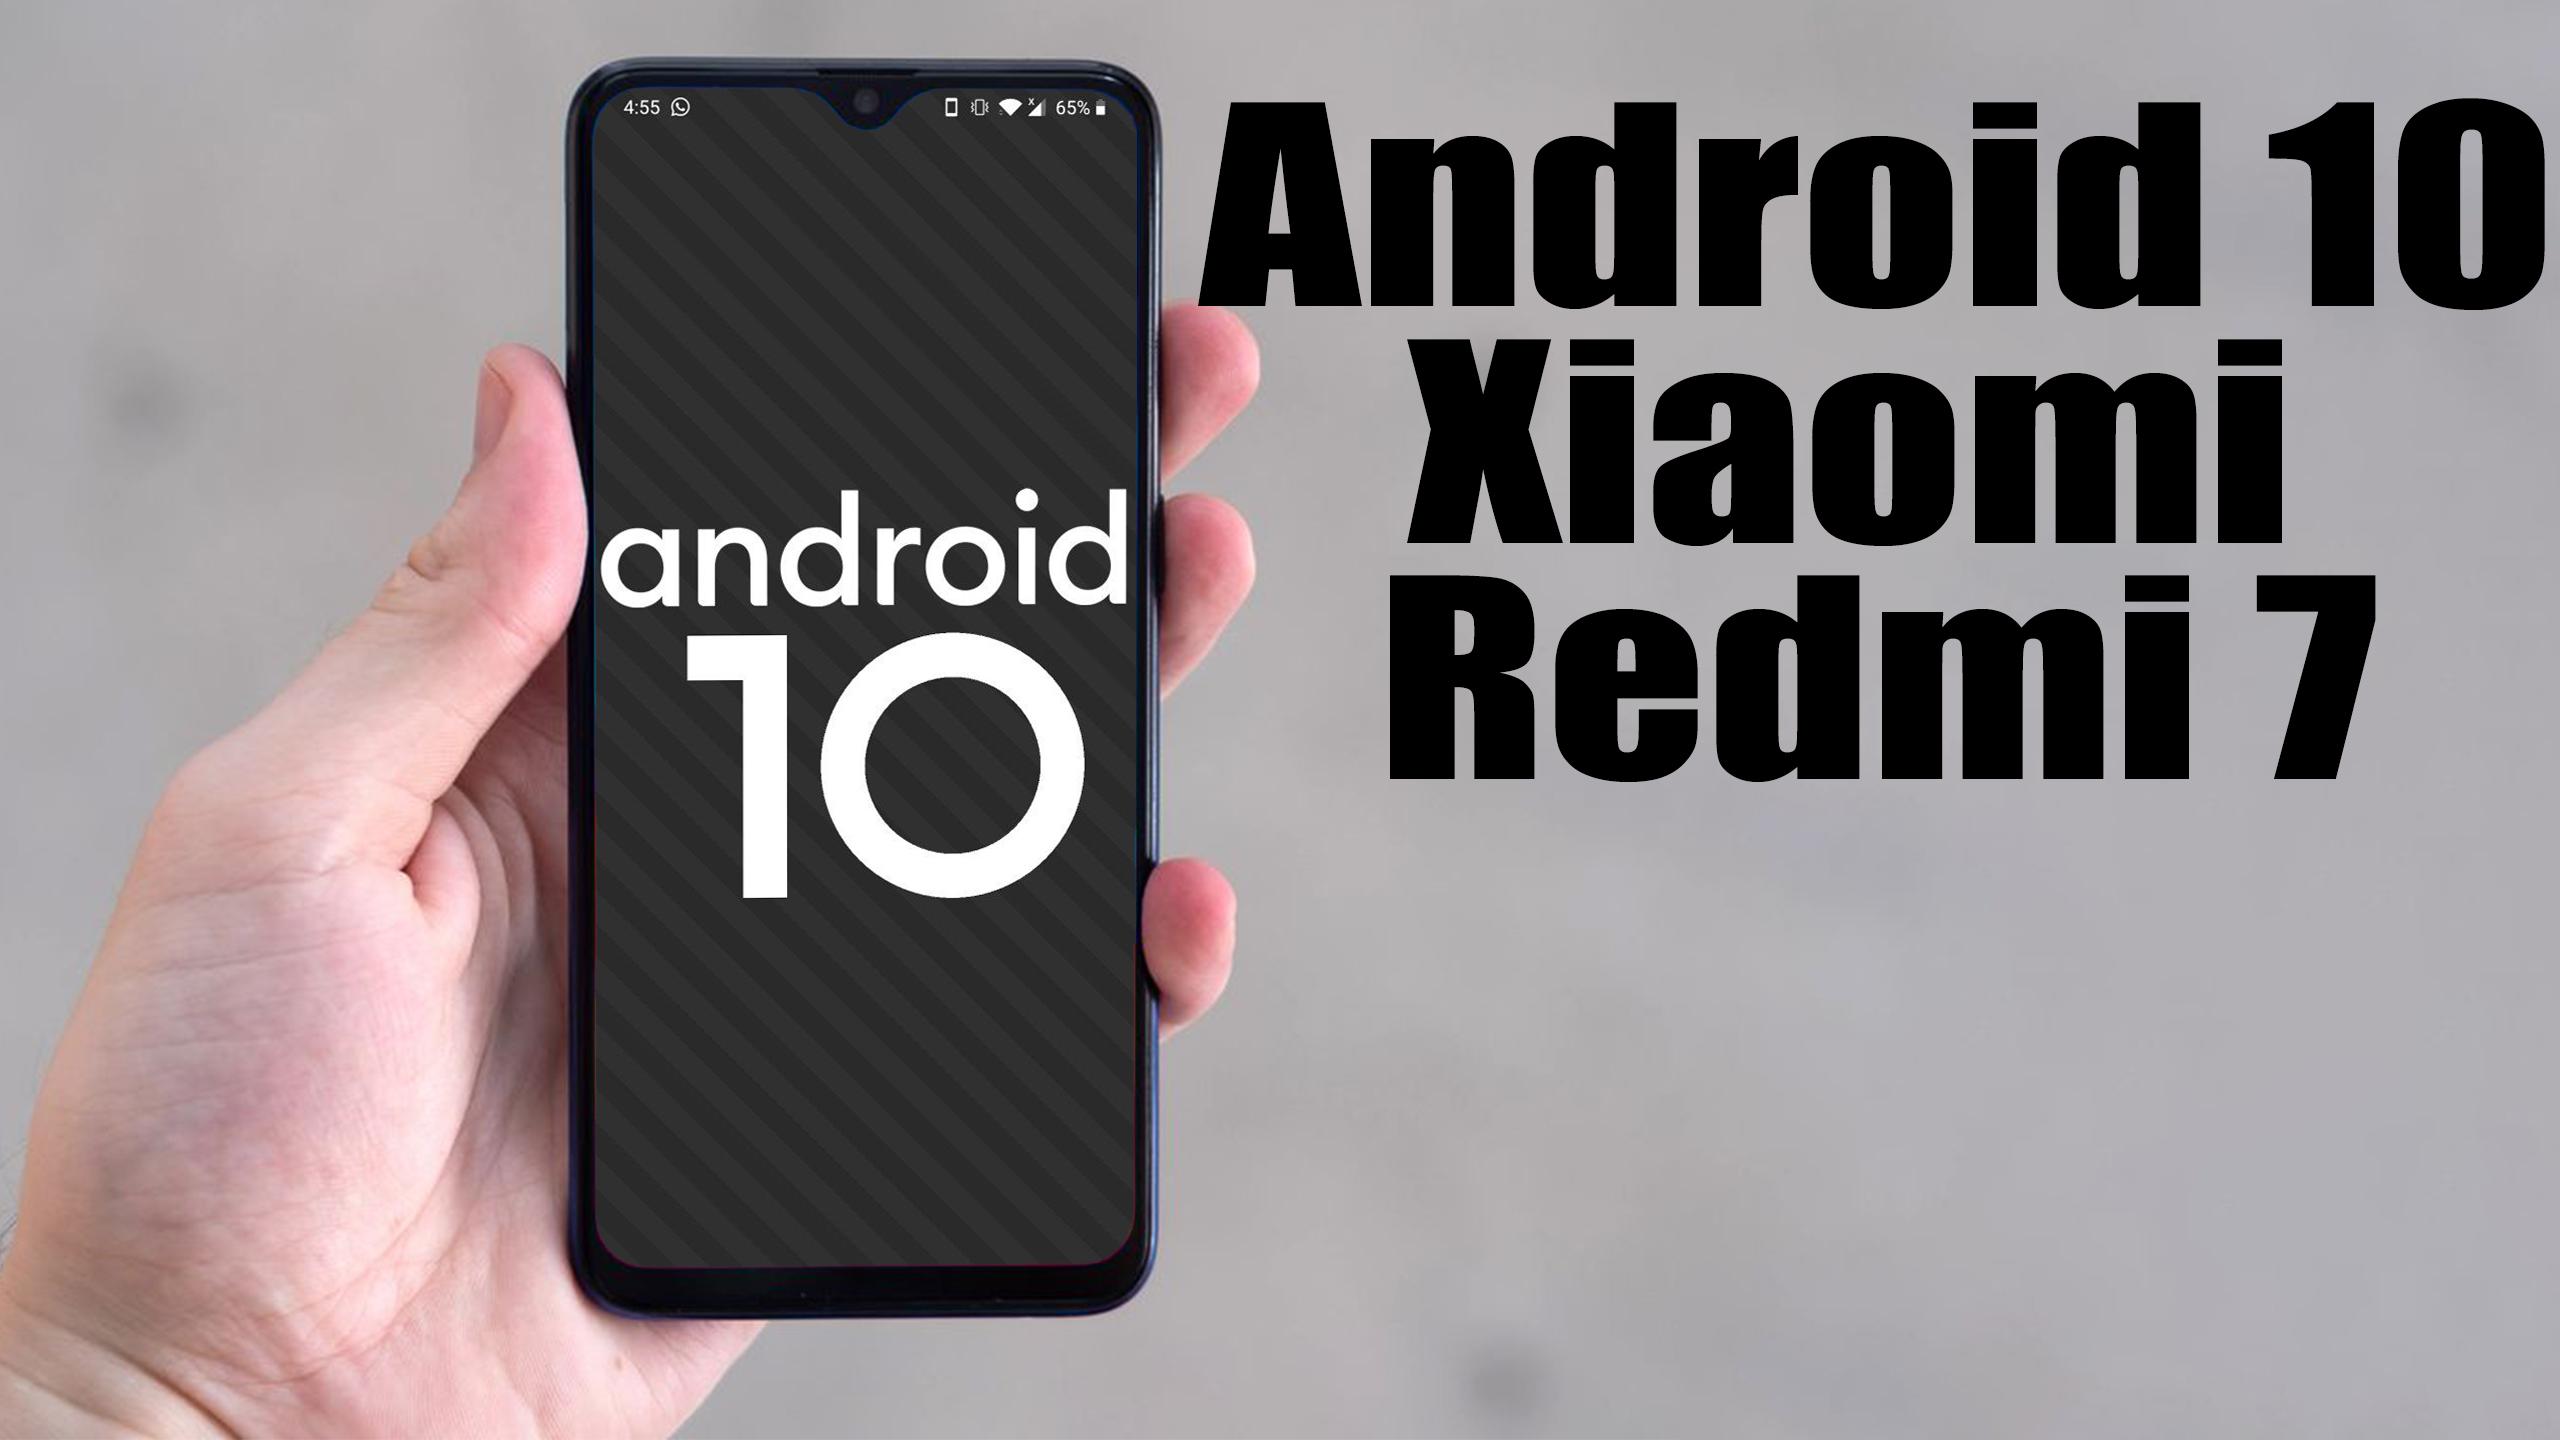 Install Android 10 Xiaomi Redmi 7 Resurrection Remix How To Guide The Upgrade Guide 9286